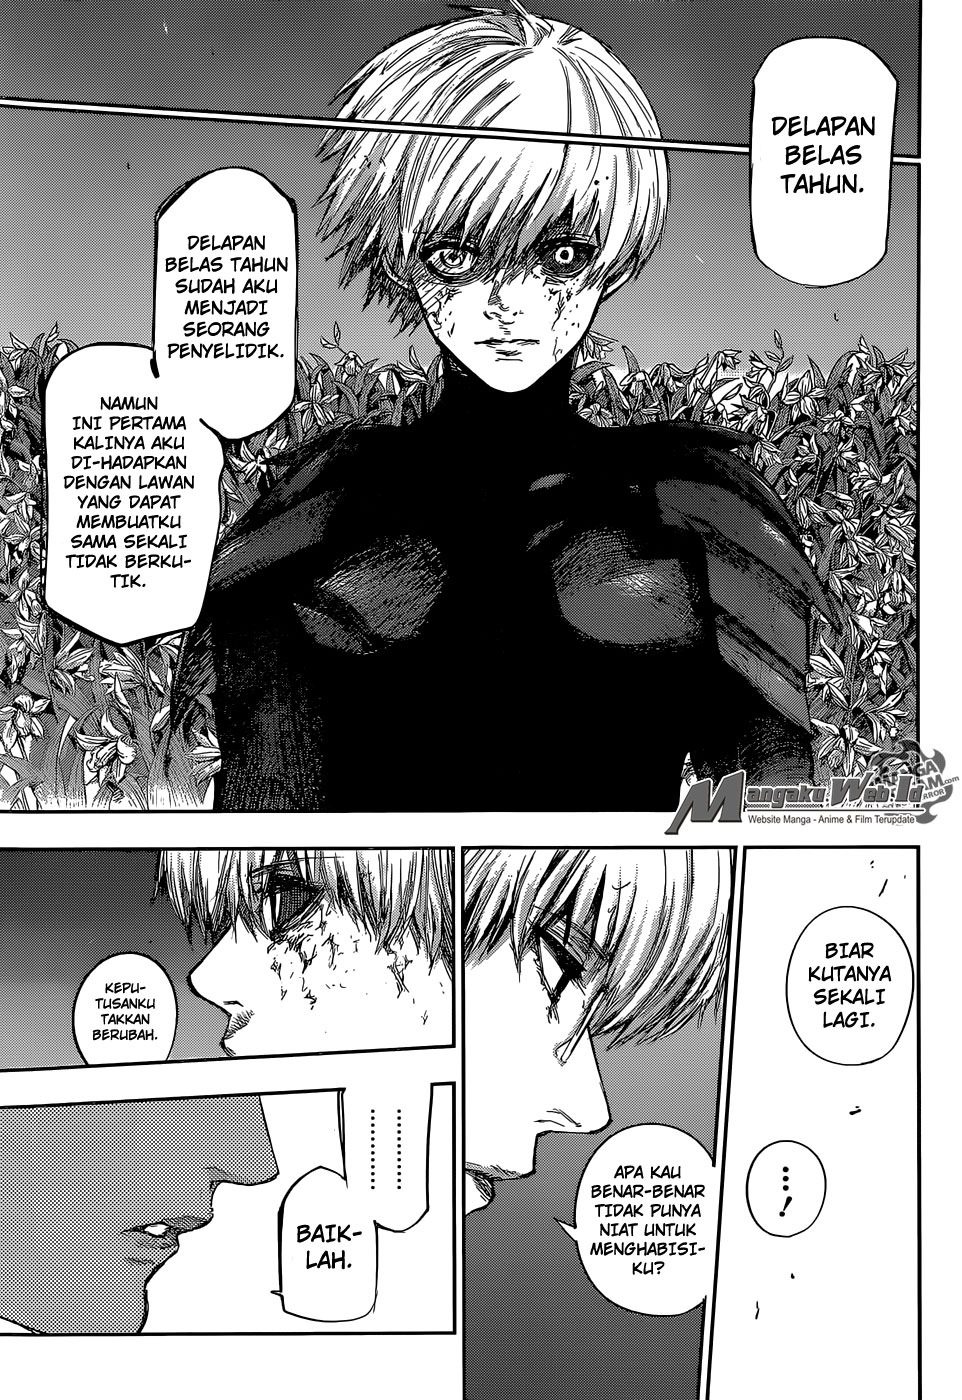 Tokyo Ghoul:re Chapter 82